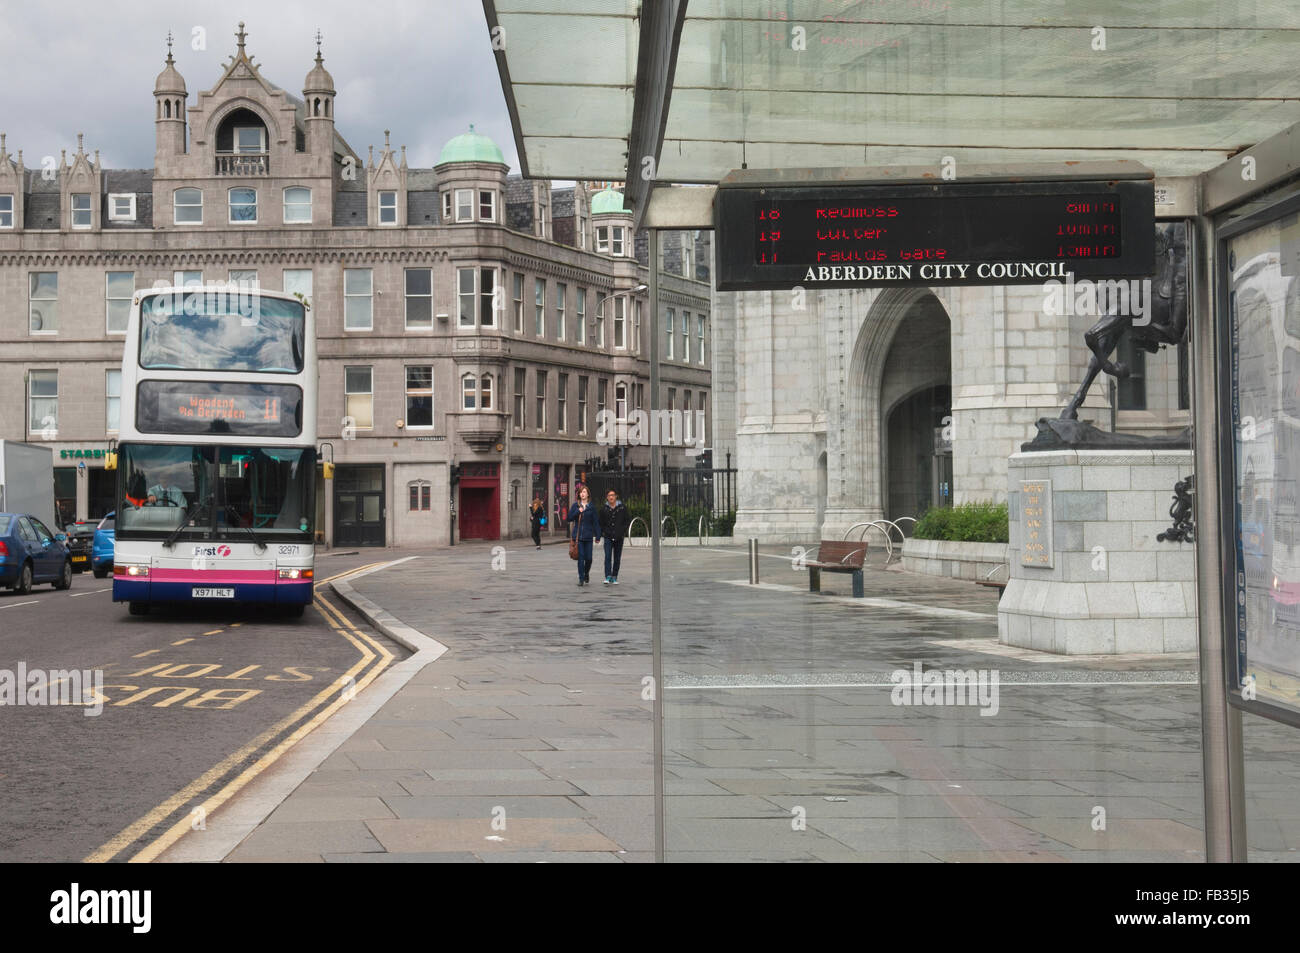 Bus approaching bus stop in Aberdeen city centre, outside Marischal College - Scotland, UK. Stock Photo